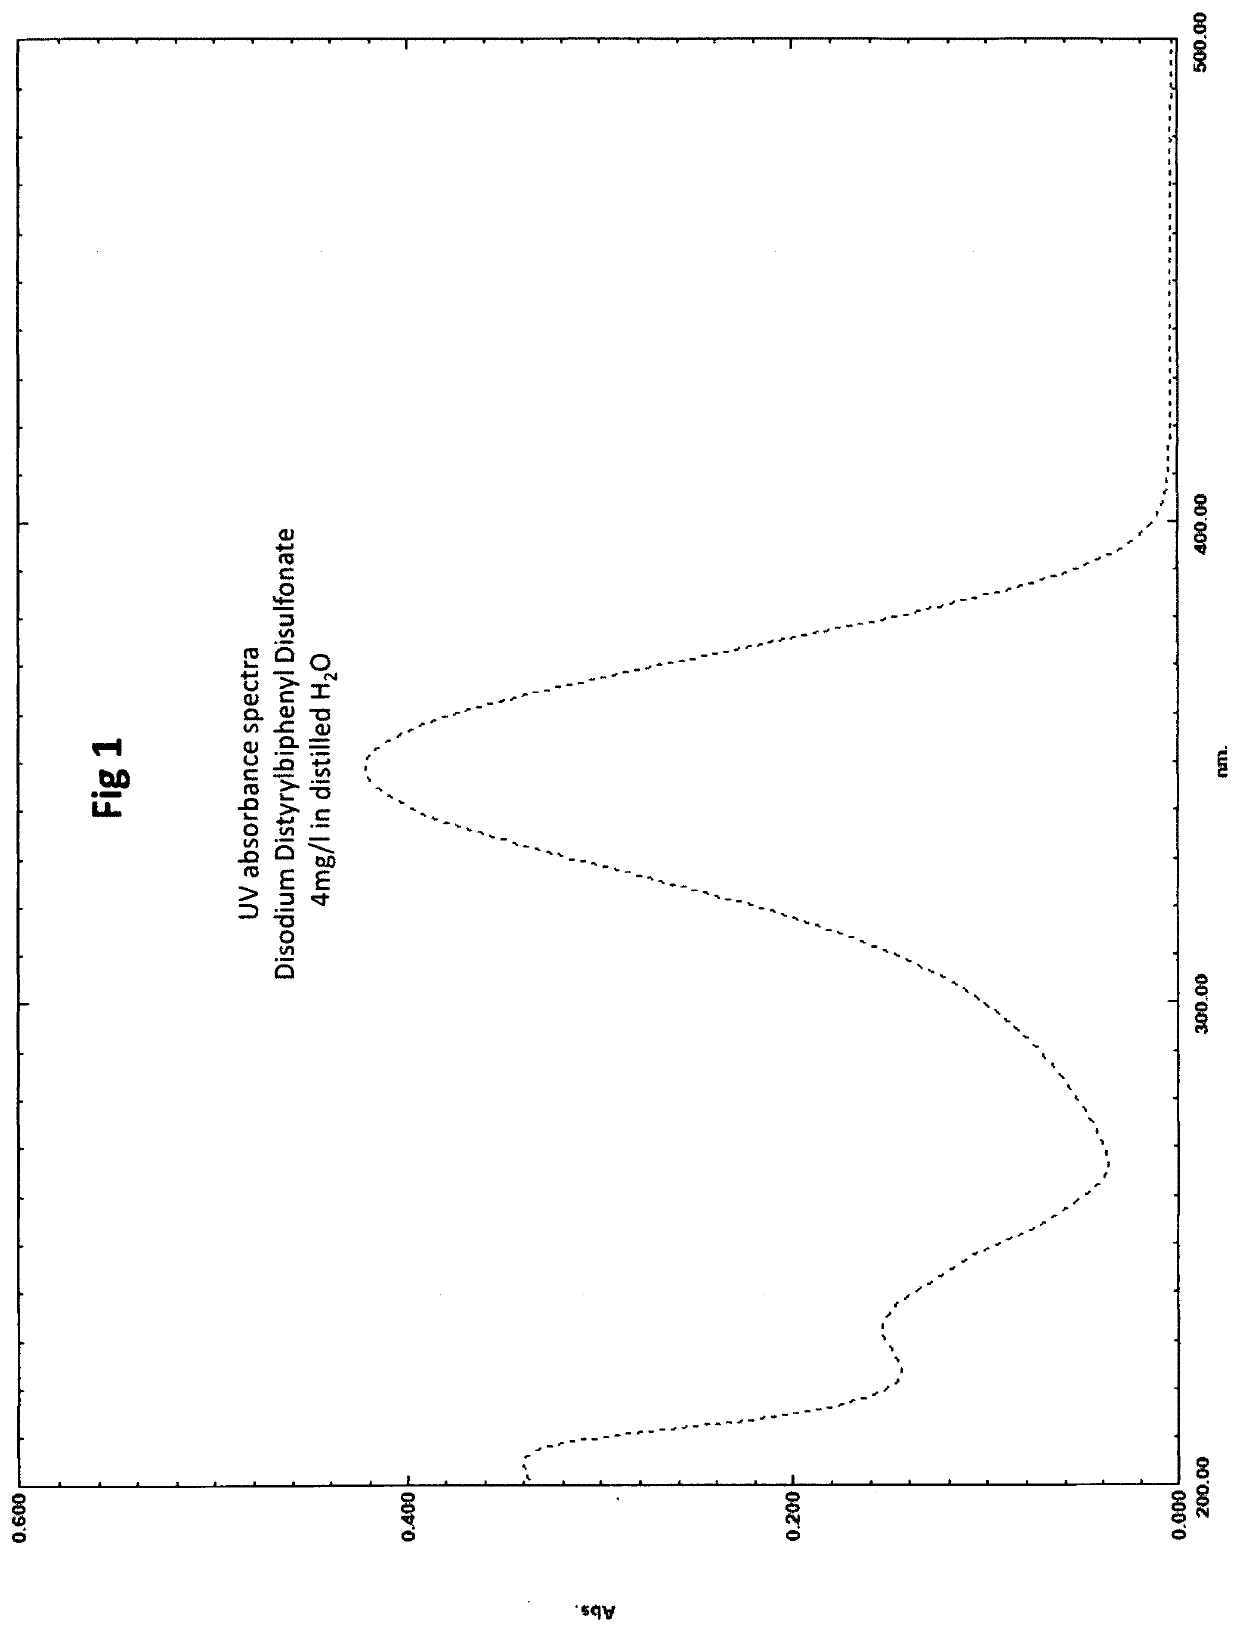 Method for the ultraviolet stabilization of chlorine dioxide in aqueous systems